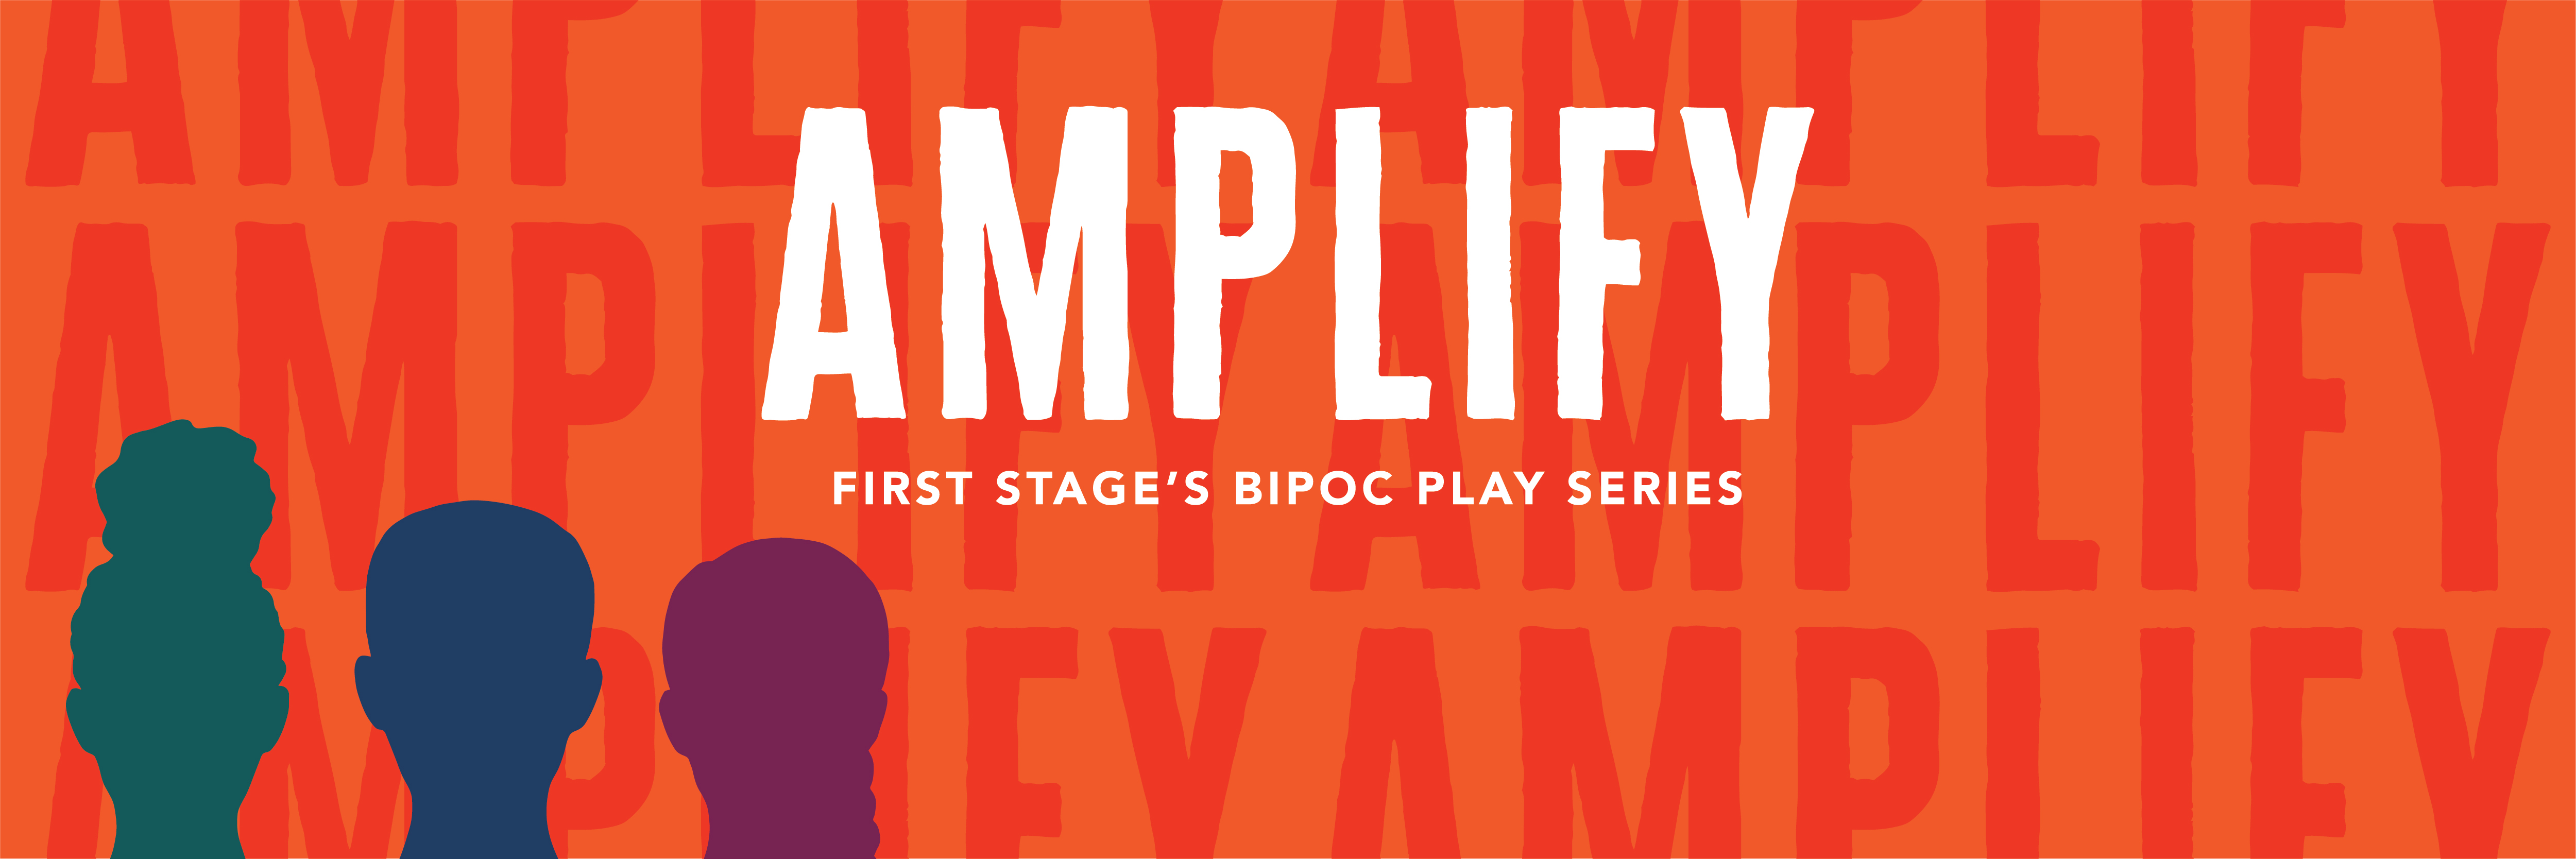 Amplify - First Stage's BIPOC Play Series